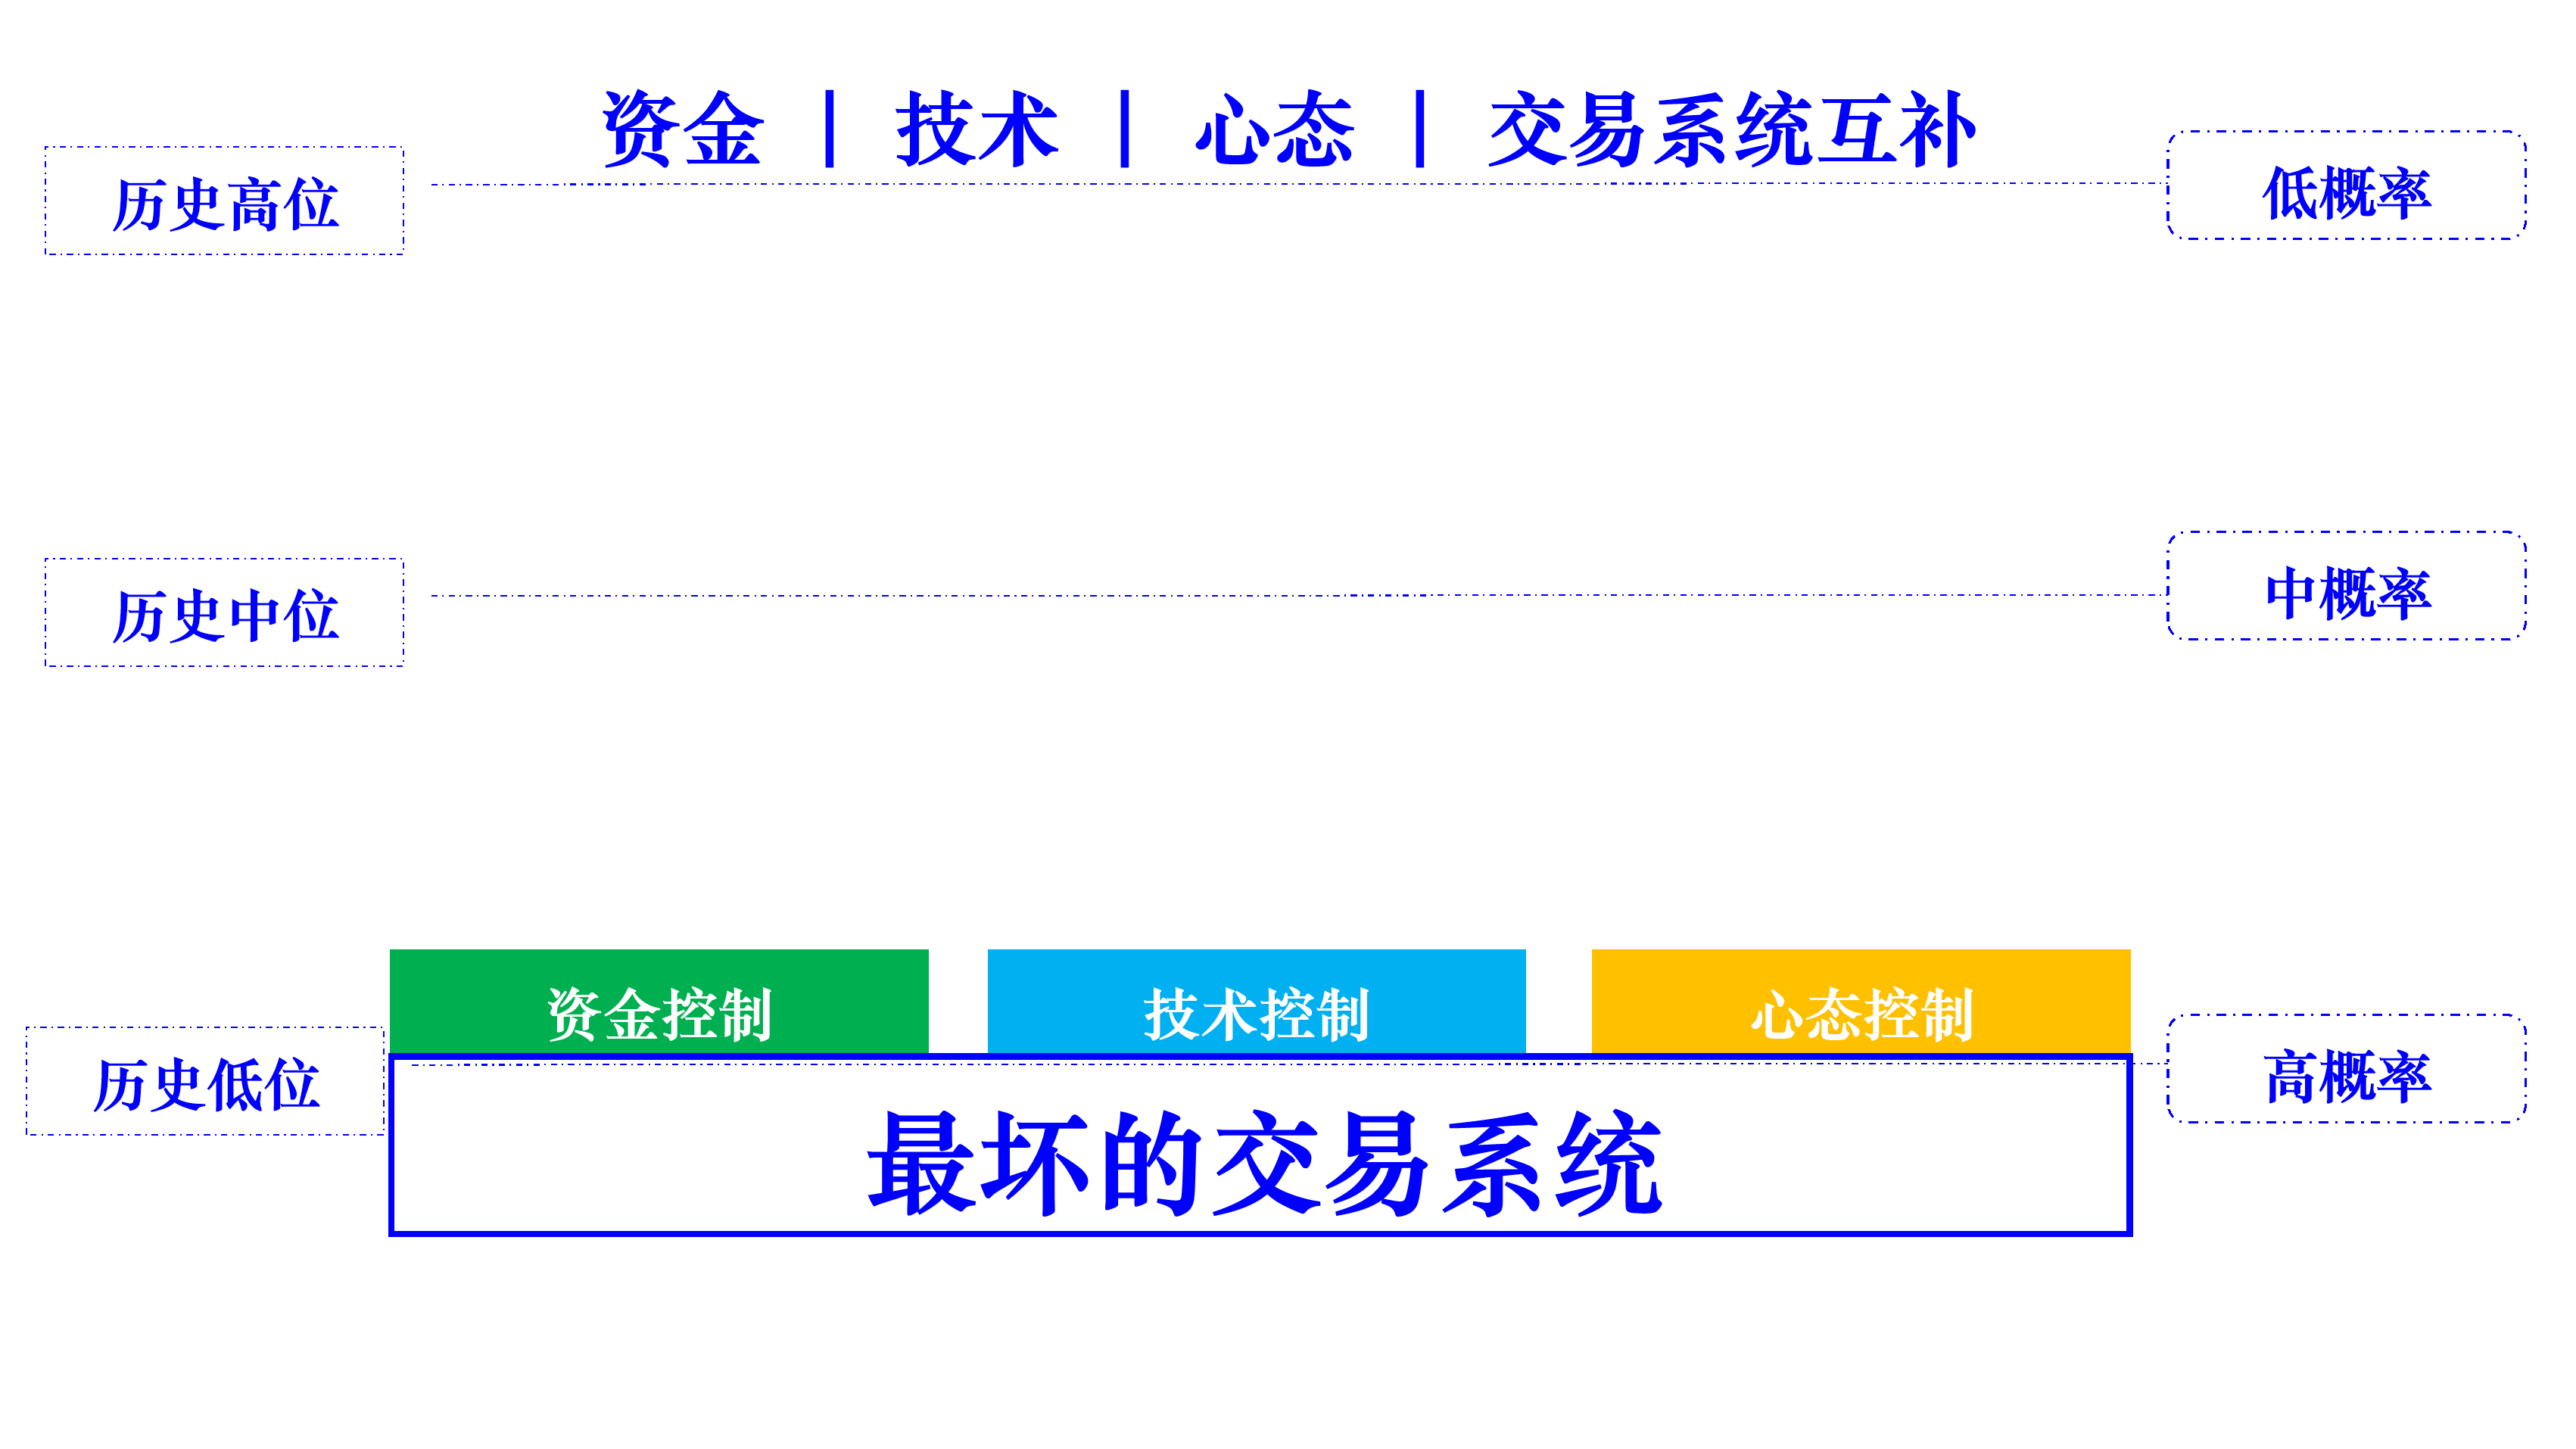 funds technology mentality trading system cn